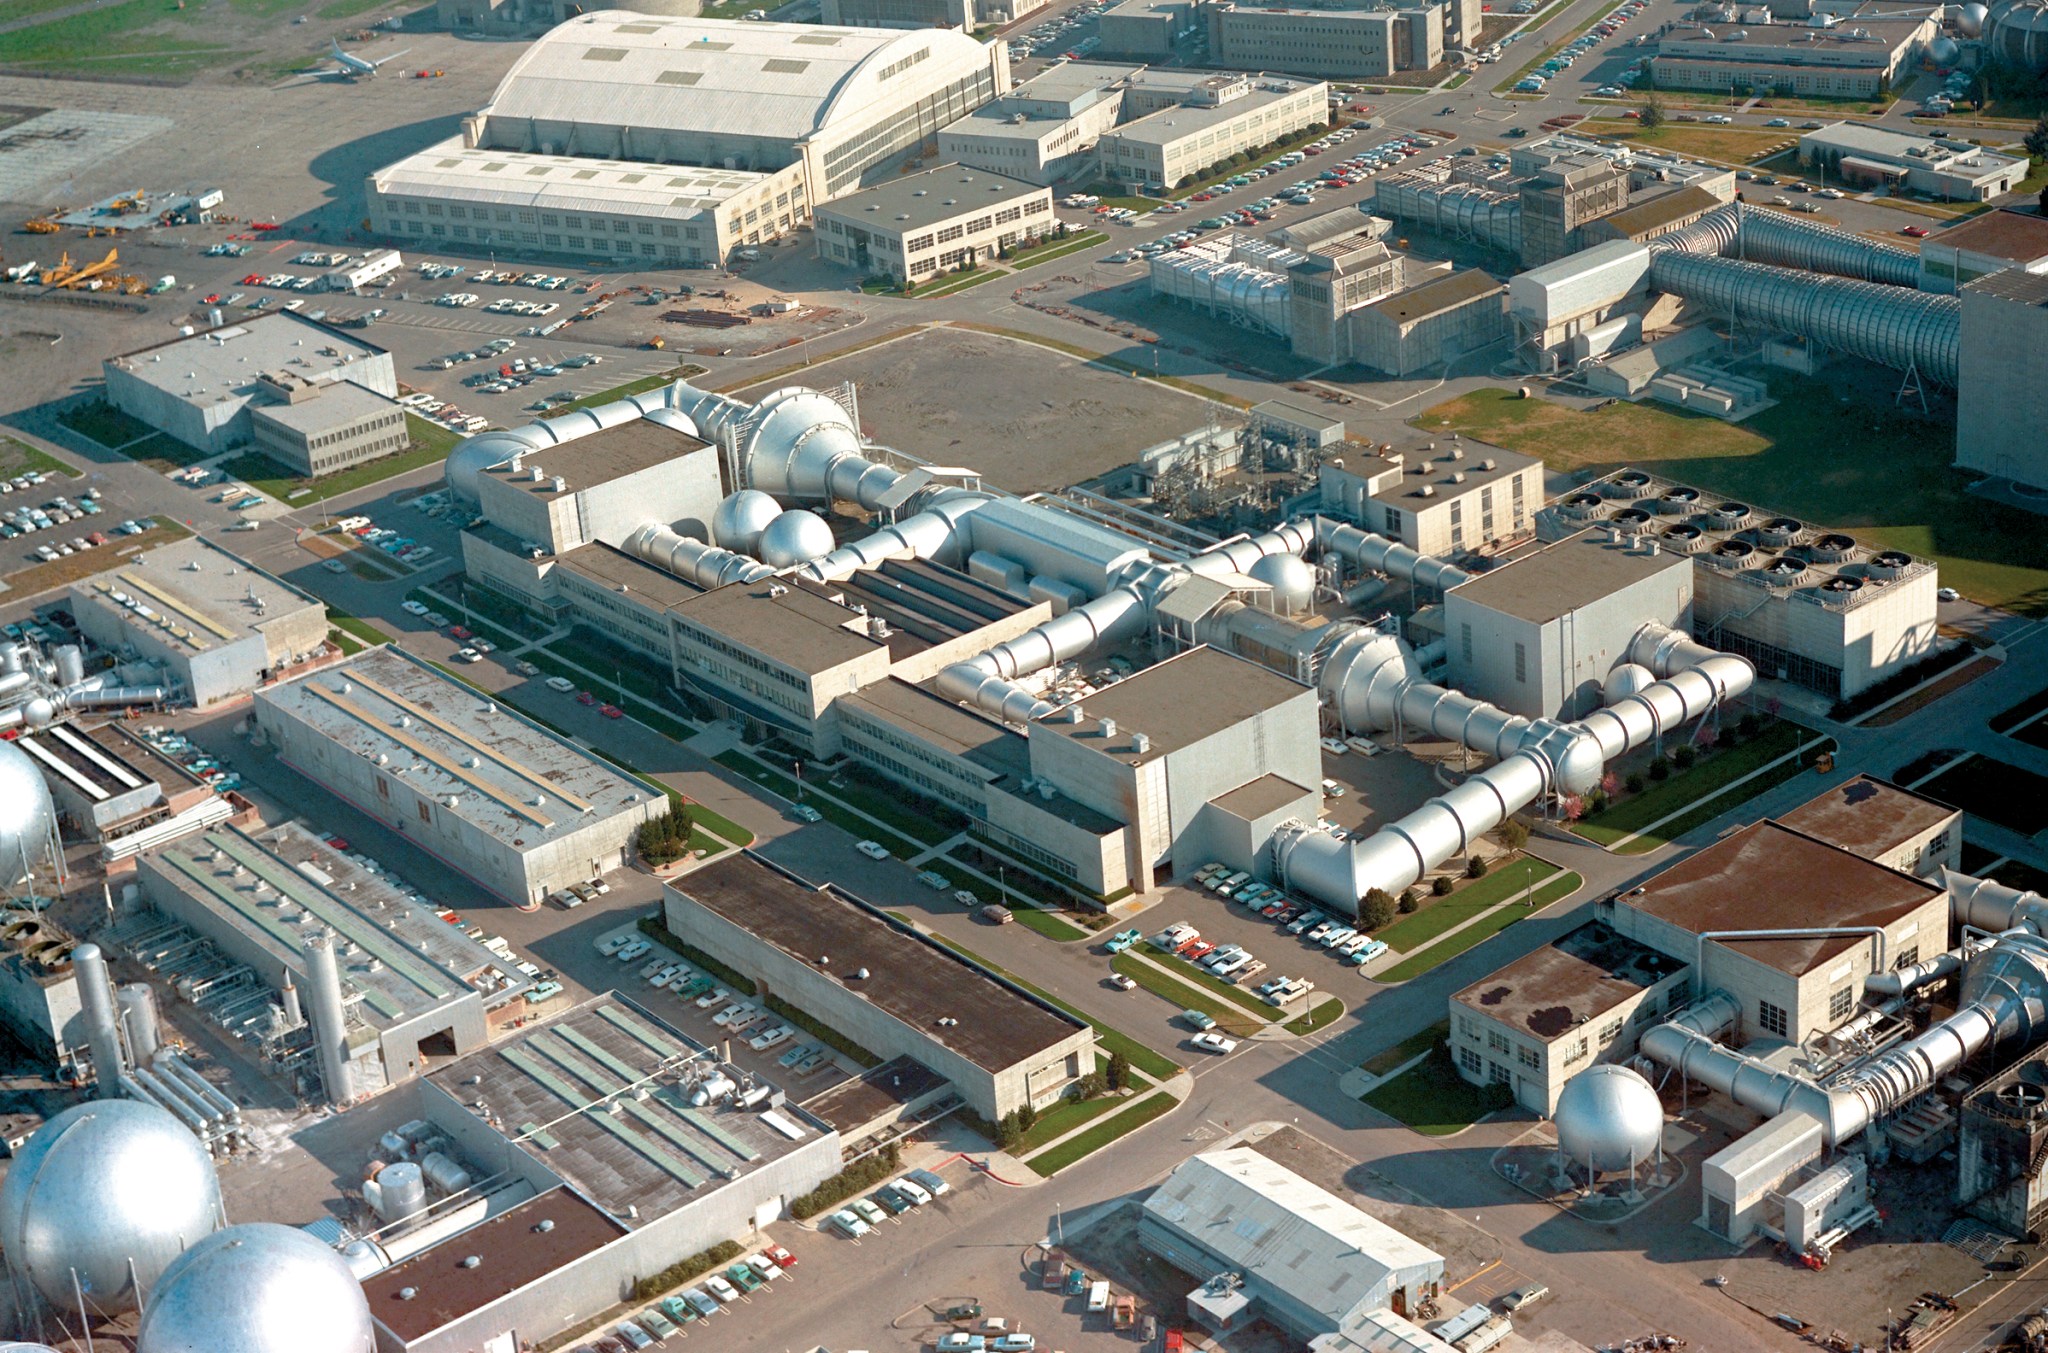 Aerial of the Wind Tunnel complex